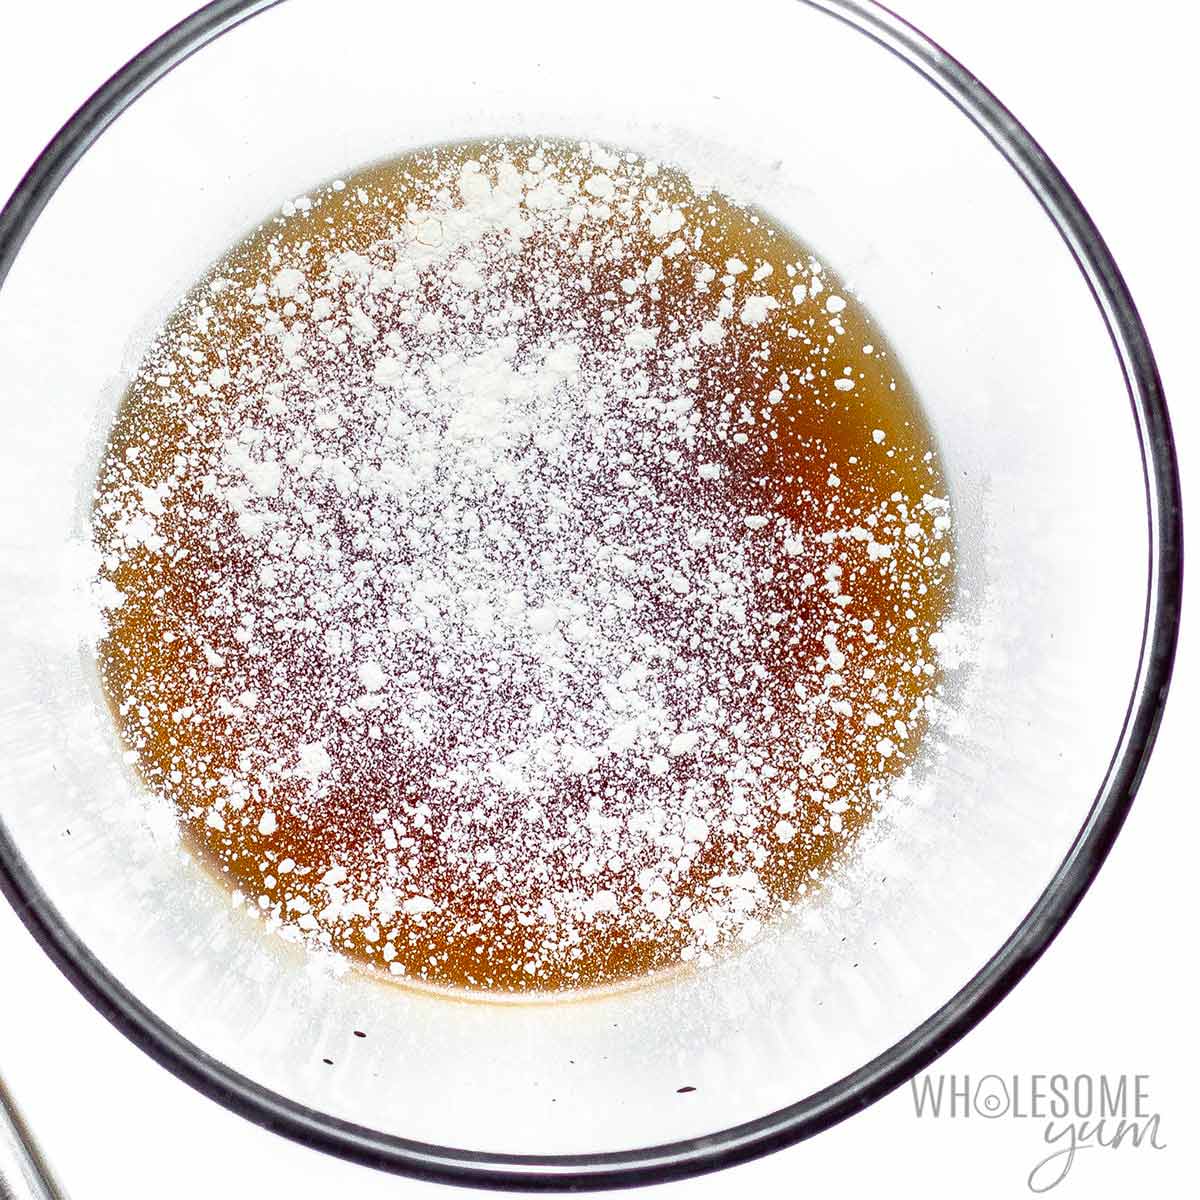 Xanthan gum sprinkled over syrup in a bowl.